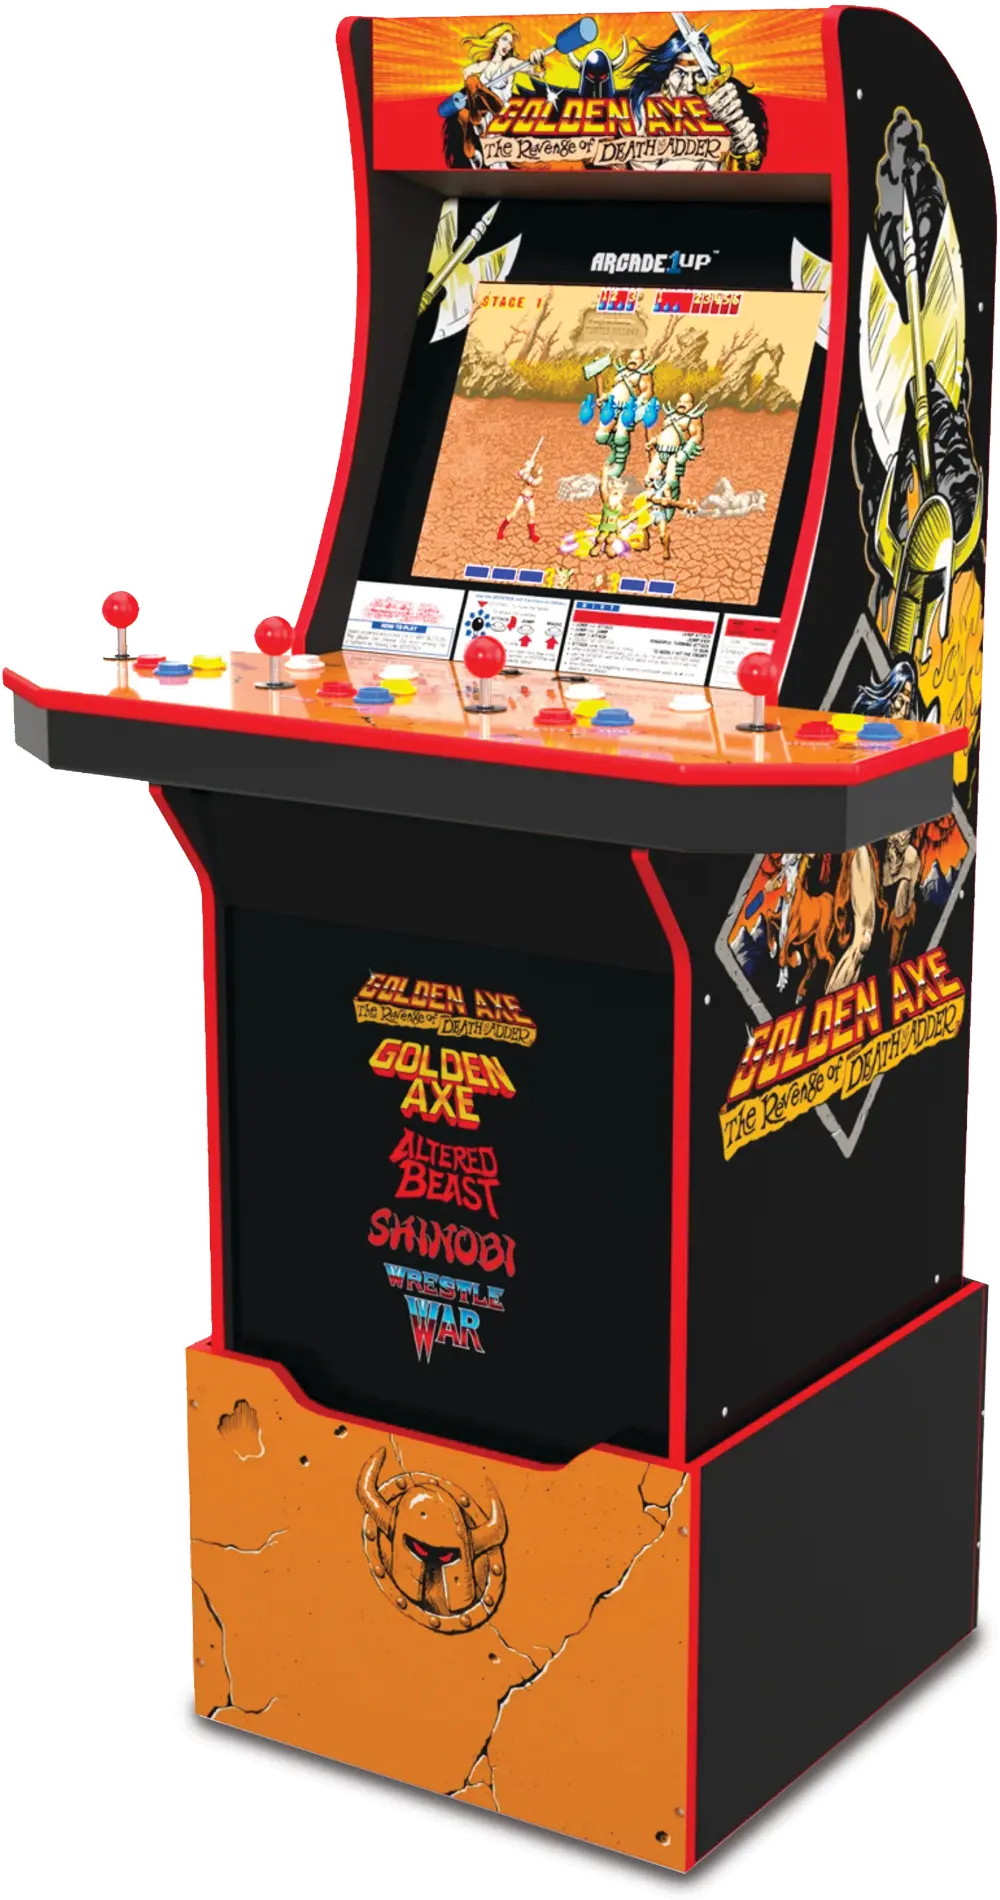 ARCADE1UP/GOLDEN_AXE Arcade 1Up Golden Axe Arcade with Riser-1